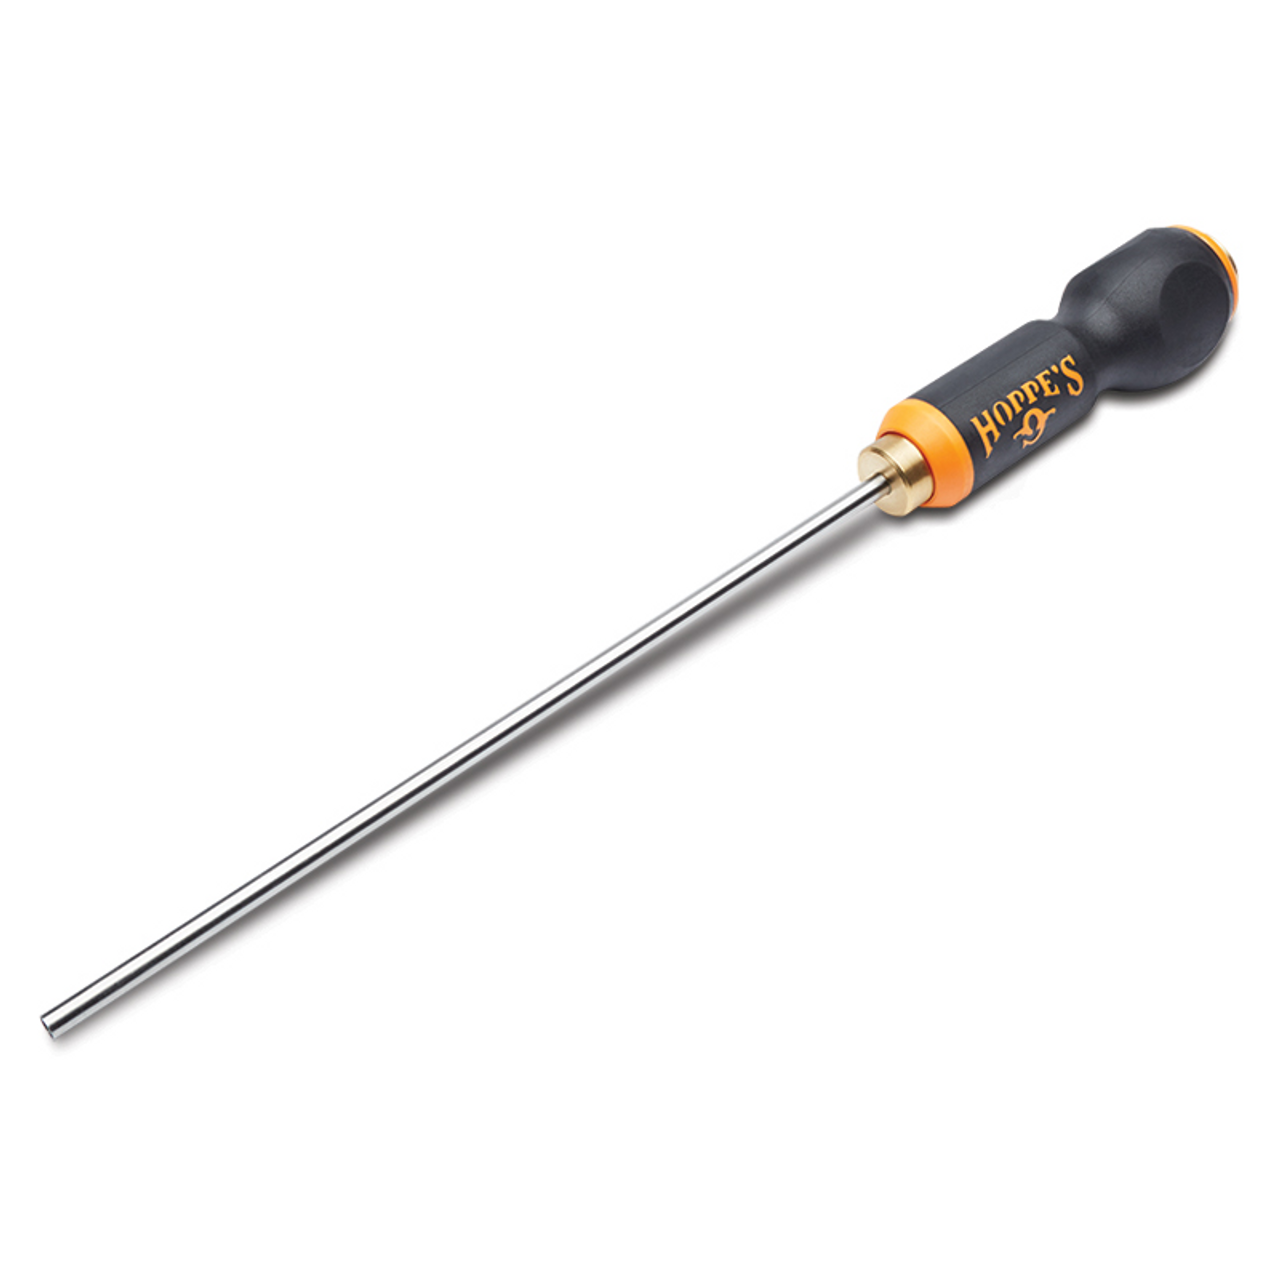 Hoppe's Stainless Steel Rifle Cleaning Rod, 30 Cal, 36"